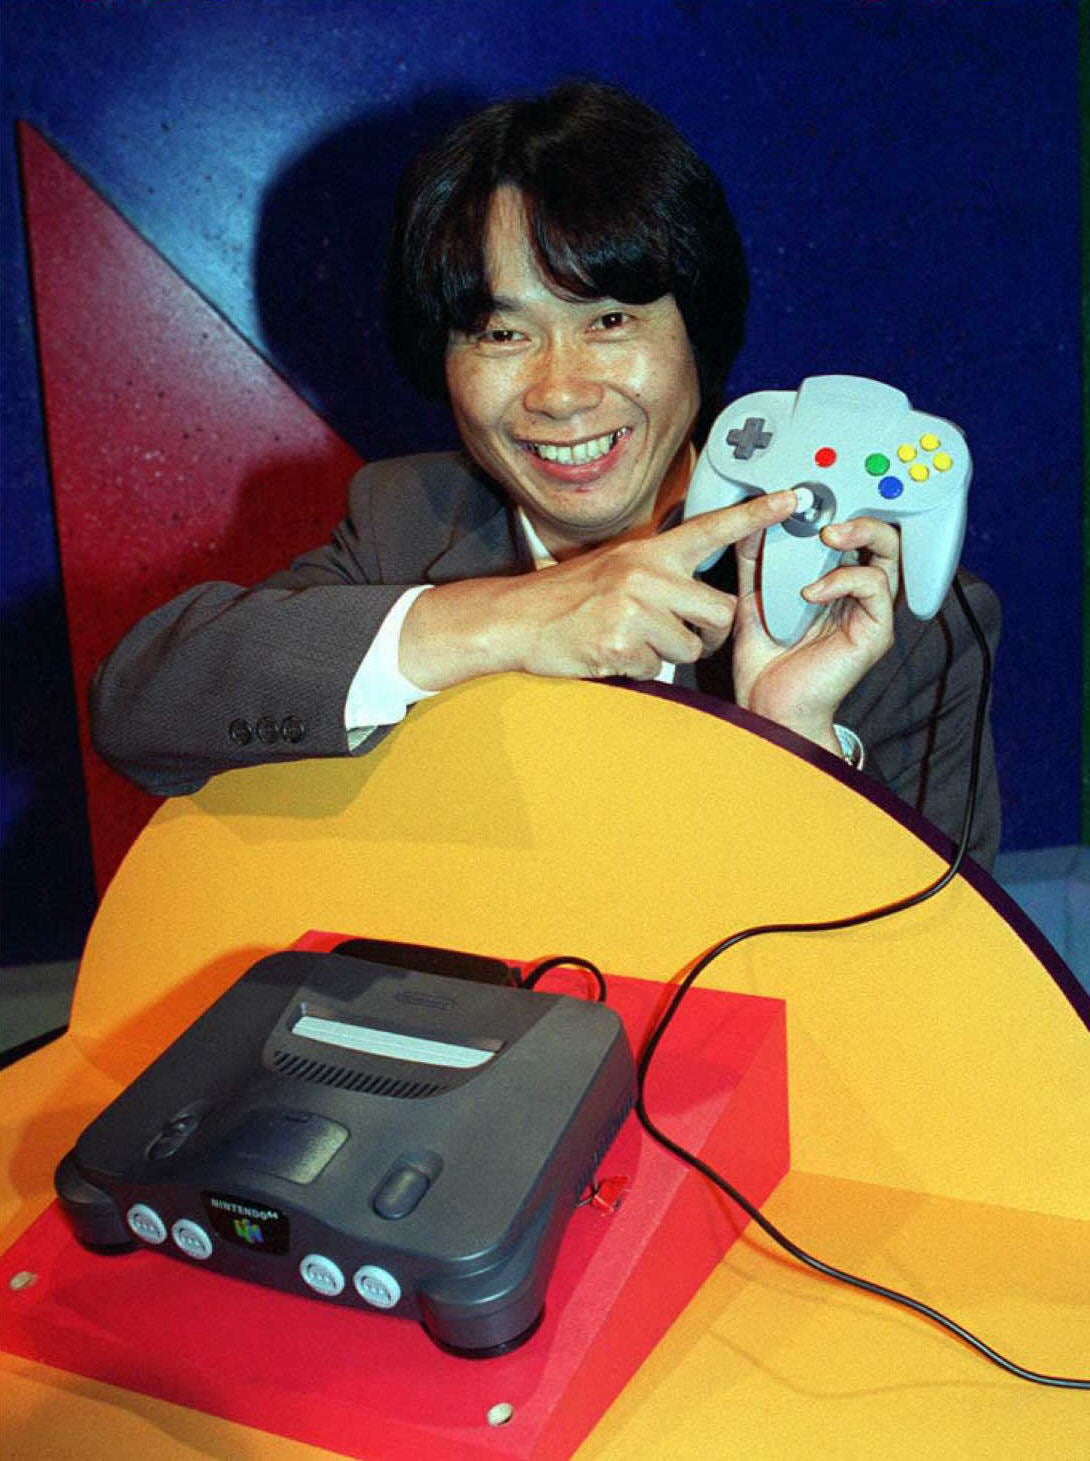 Shigeru Miyamoto shows off the Nintendo 64 and its controller (Photo: JOHN T. BARR/AFP via Getty Images, Getty Images)